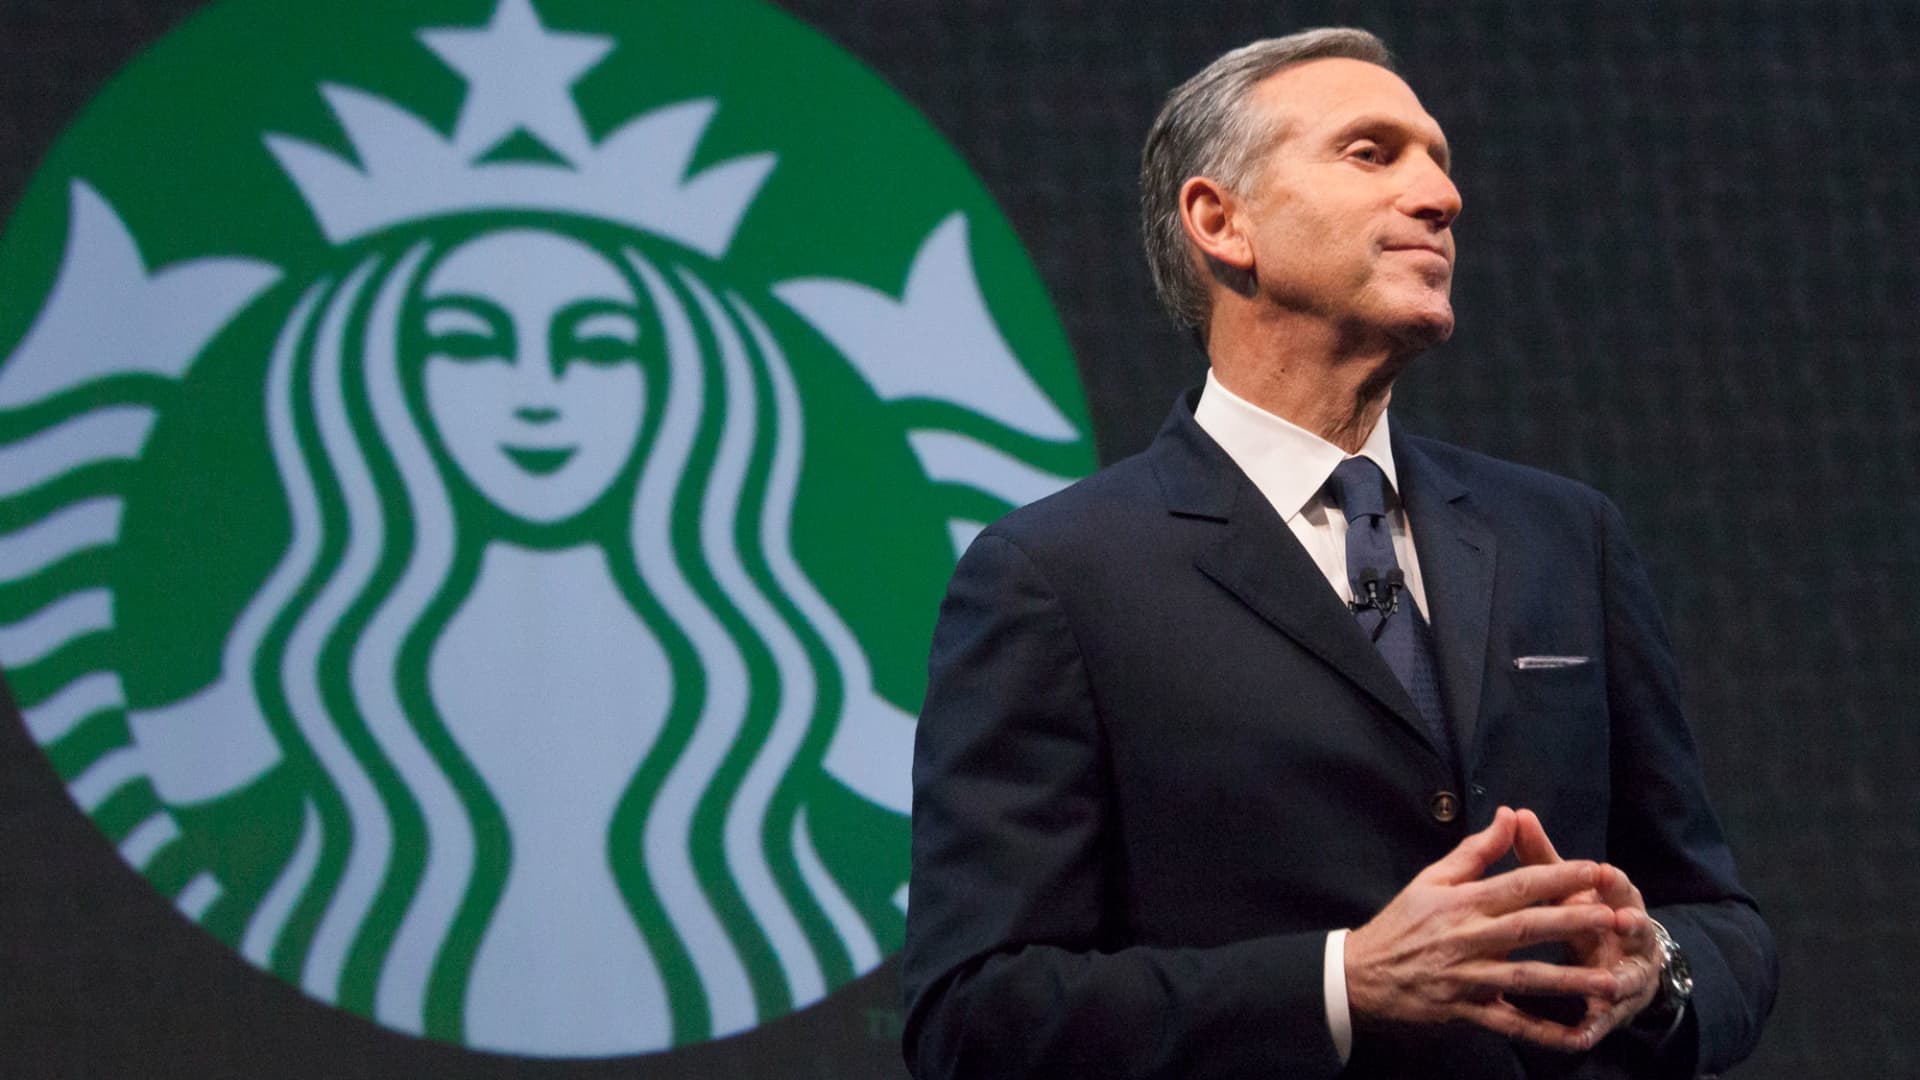 Starbucks CEO Howard Schultz tells corporate workers to return to the office 3 days a week